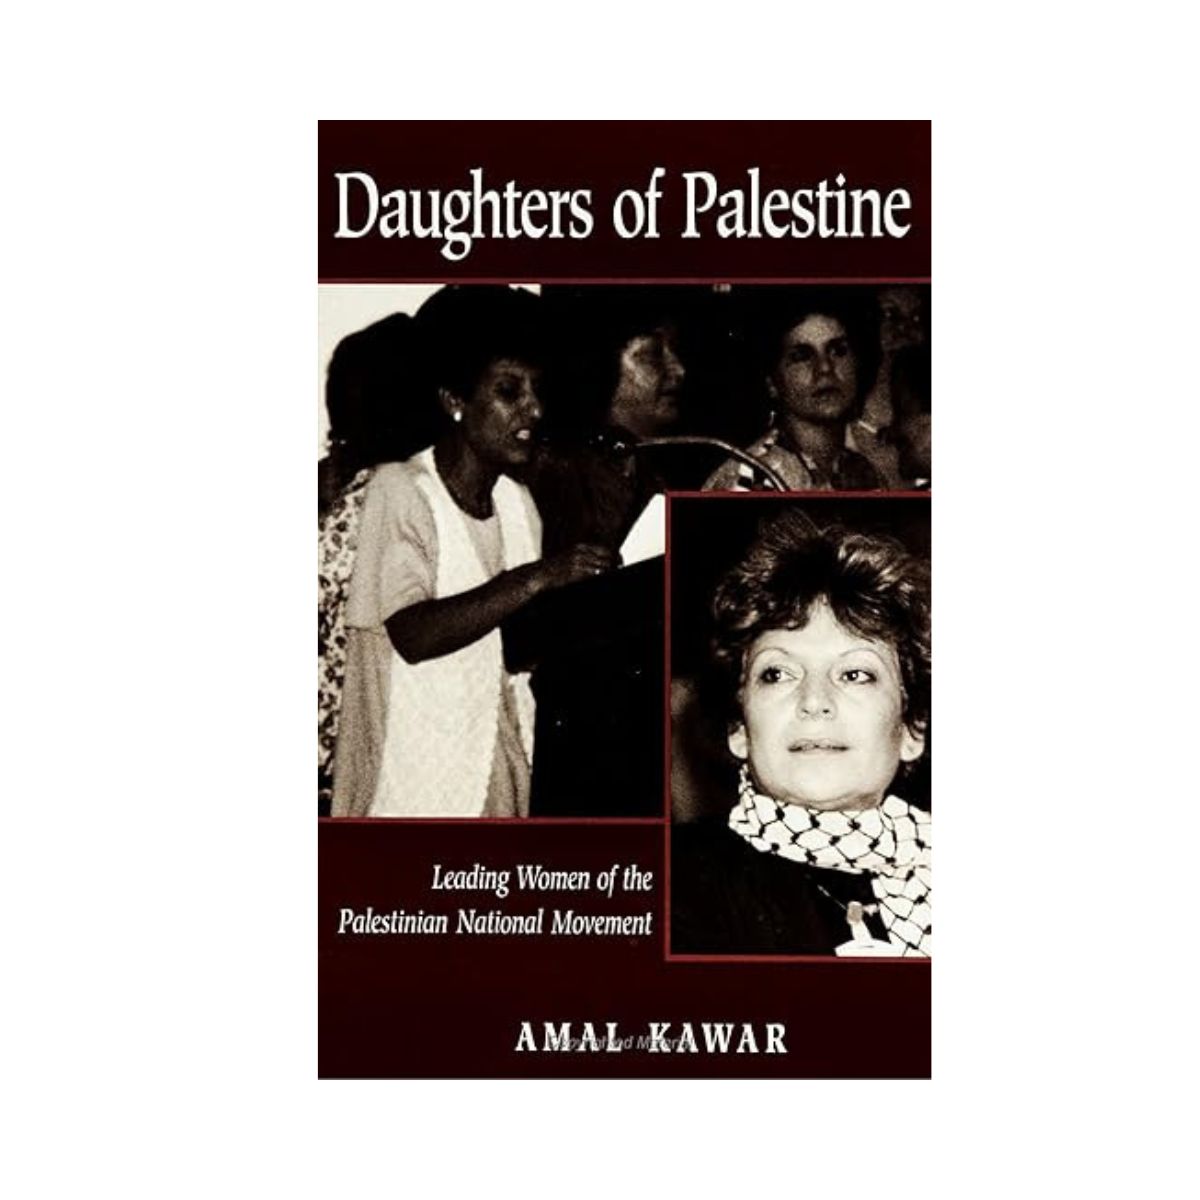 Daughters of Palestine: Leading Women of the Palestinian National Movement